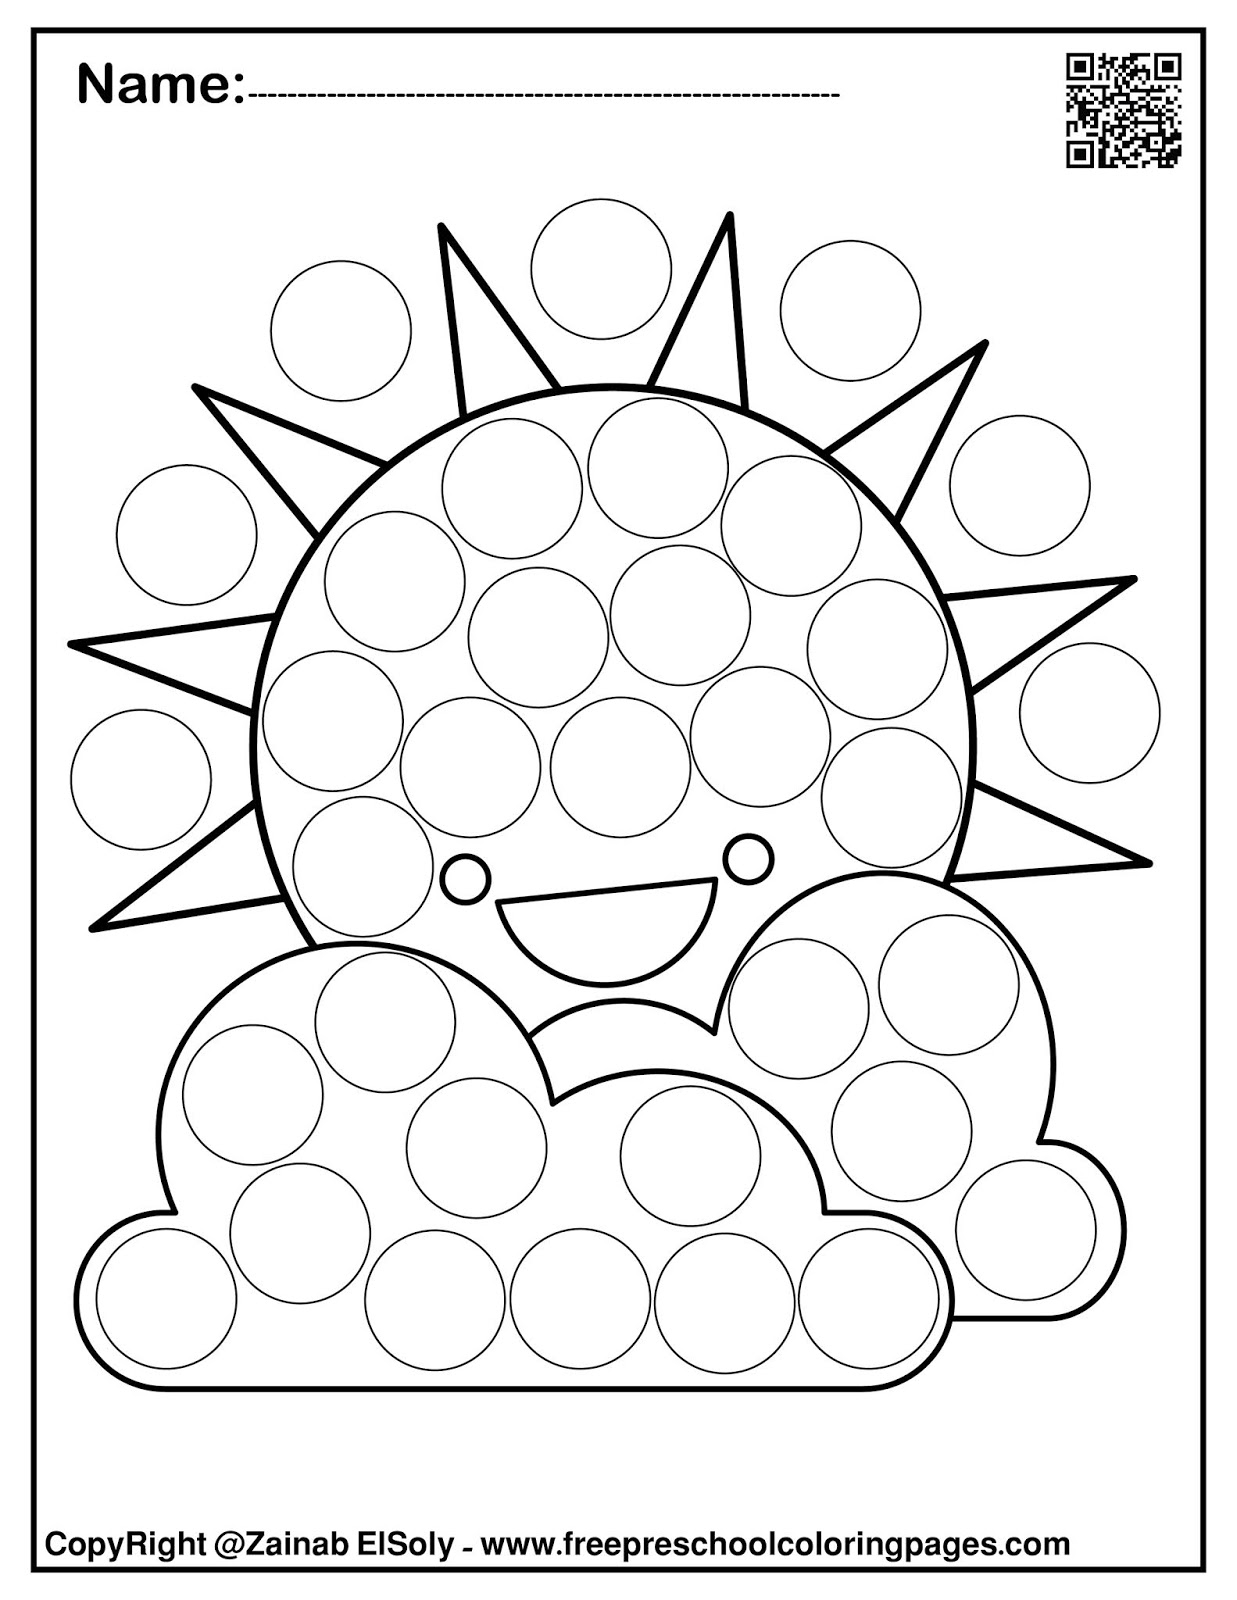 19 Dot Marker Coloring Pages Free Free Printable Coloring Pages